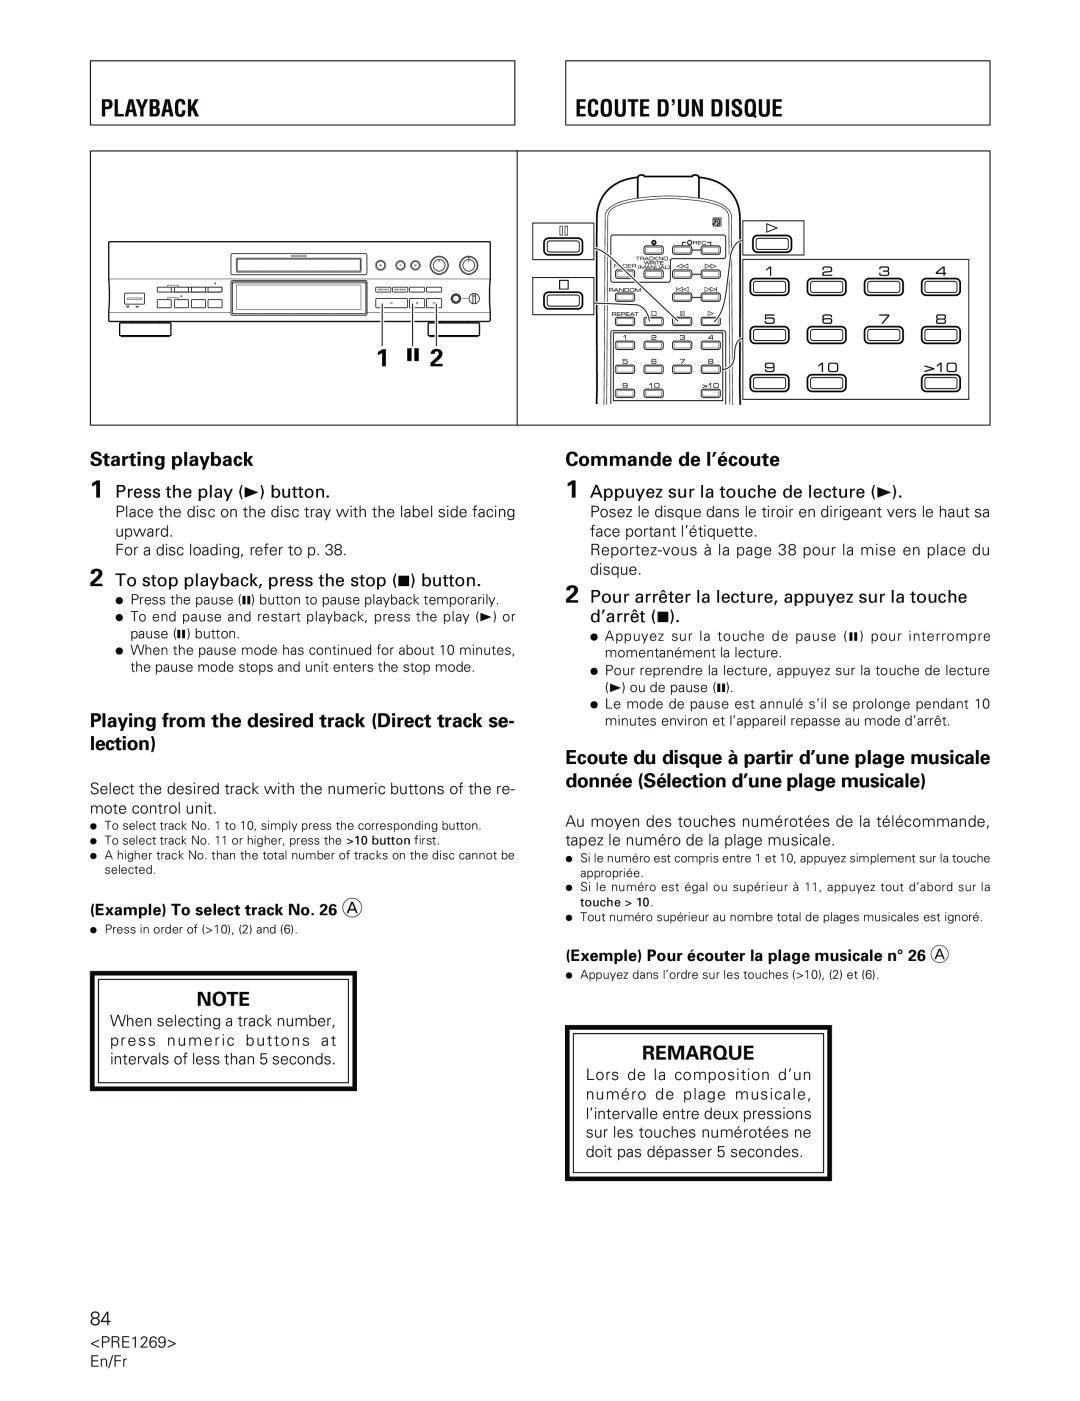 Pioneer PDR-555RW operating instructions Playback, Ecoute D’Un Disque, Starting playback, Commande de l’écoute, Remarque 